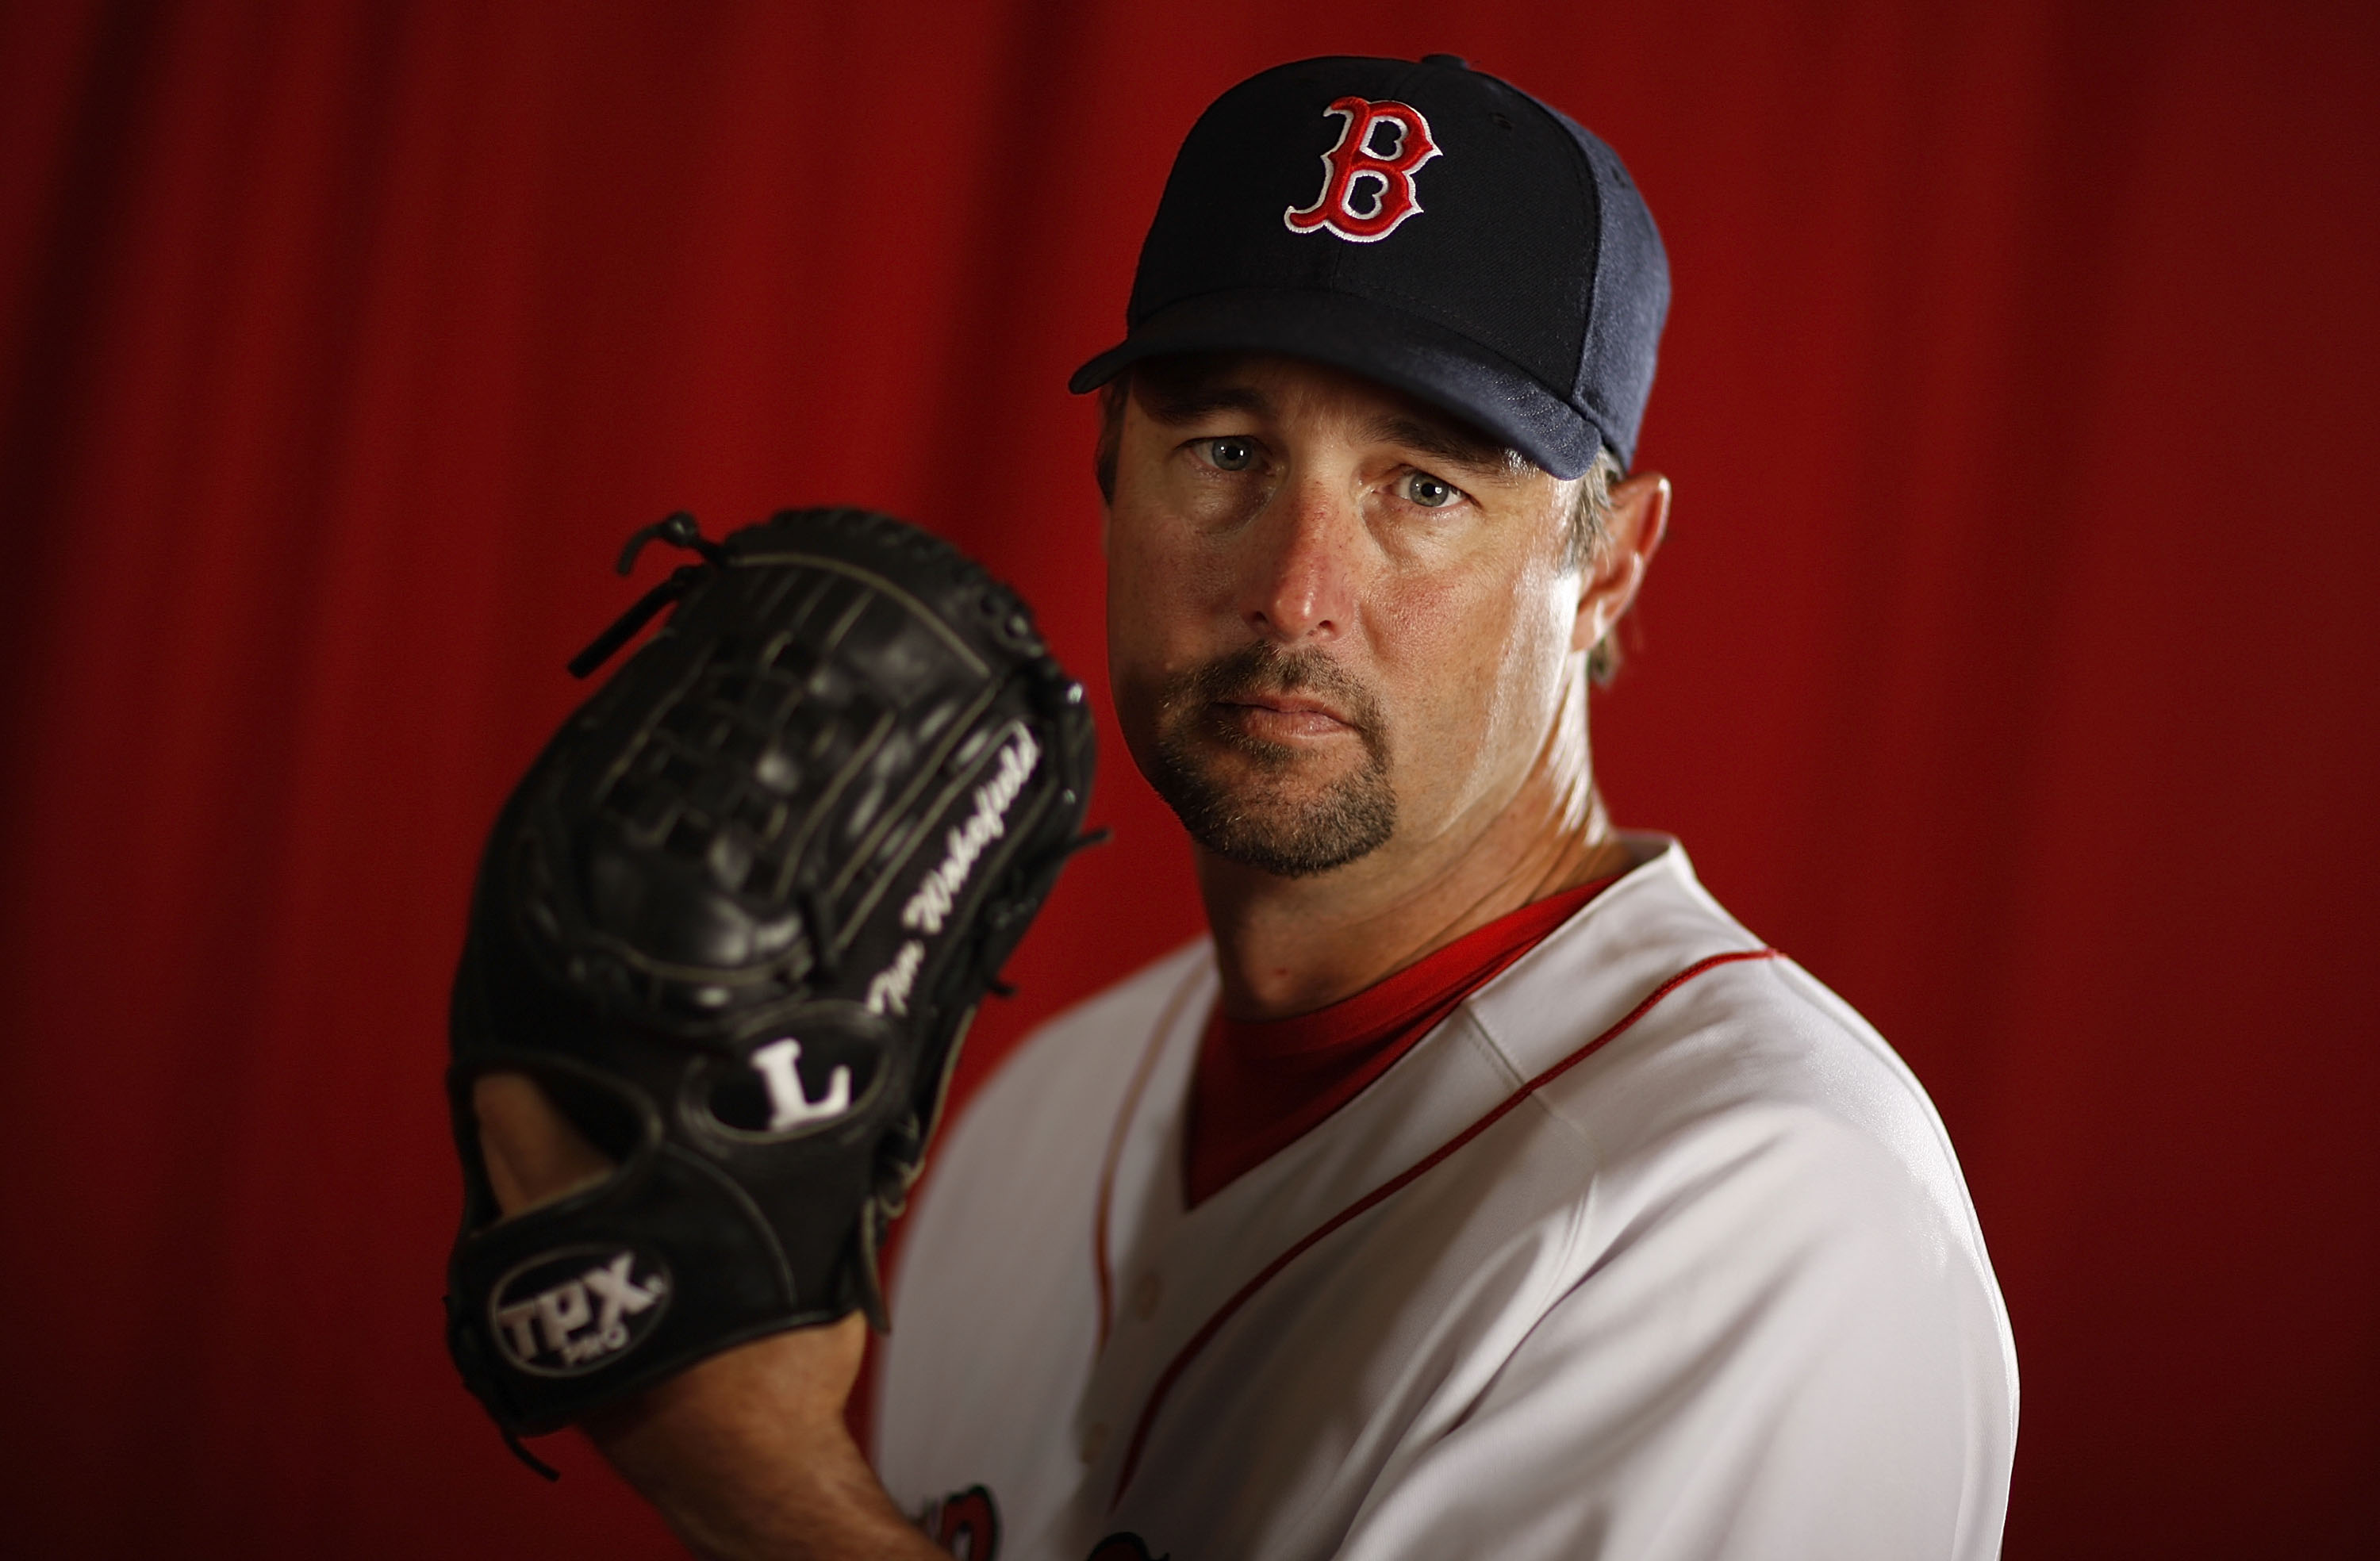 Tim Wakefield at the Boston Red Sox spring training practice facility in Ft. Myers, Florida on February 28, 2010 | Source: Getty Images